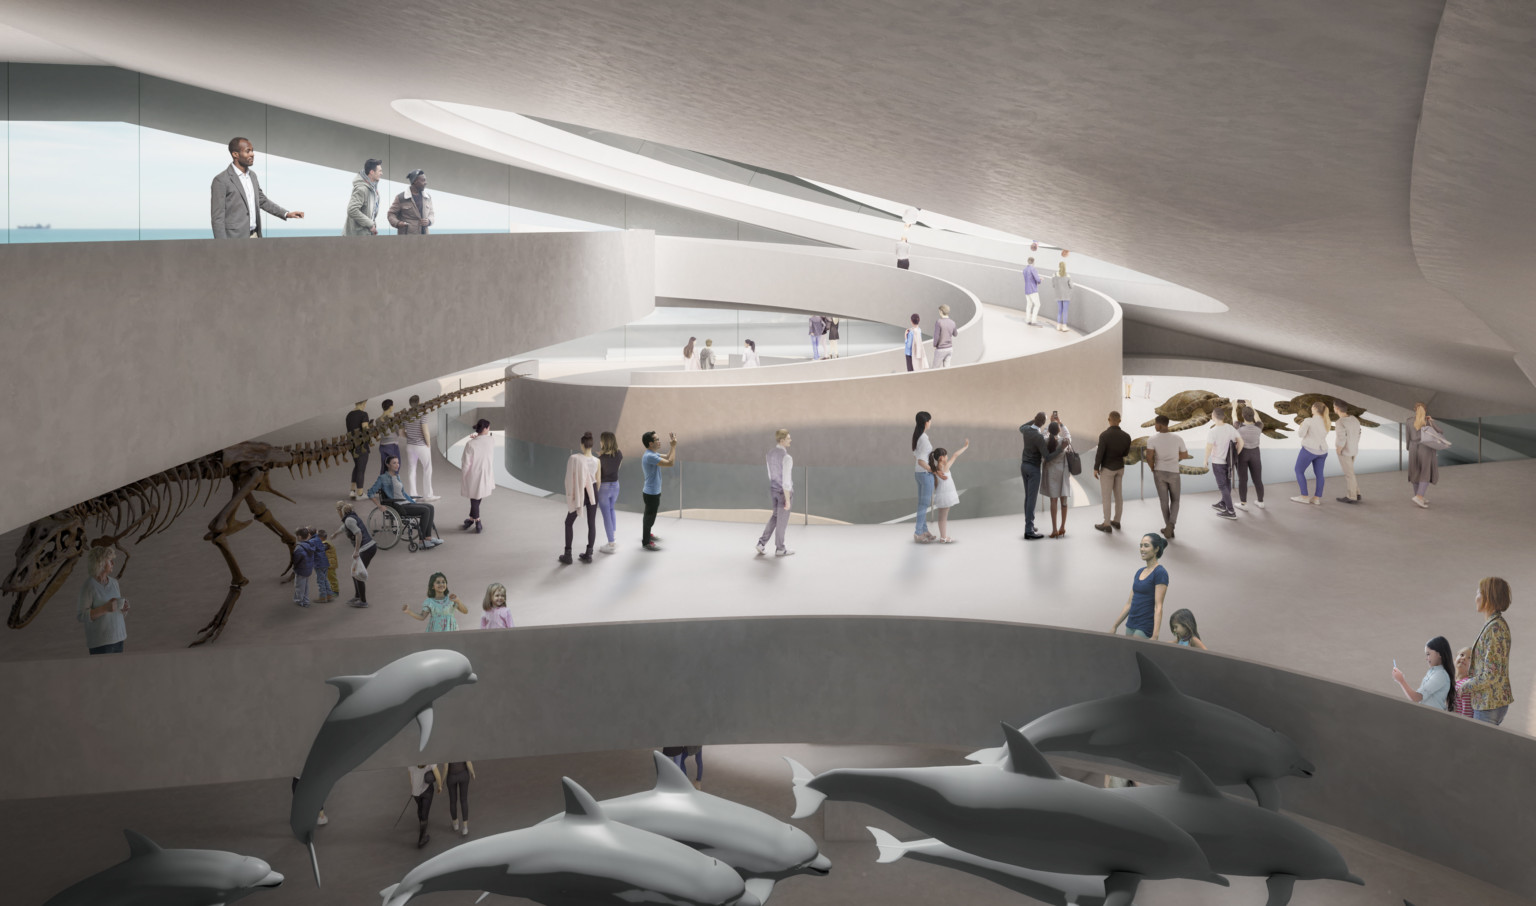 Organically curving multilevel walkway with sloping white ceiling. Dolphins are suspended, bottom, and dinosaur skeleton left